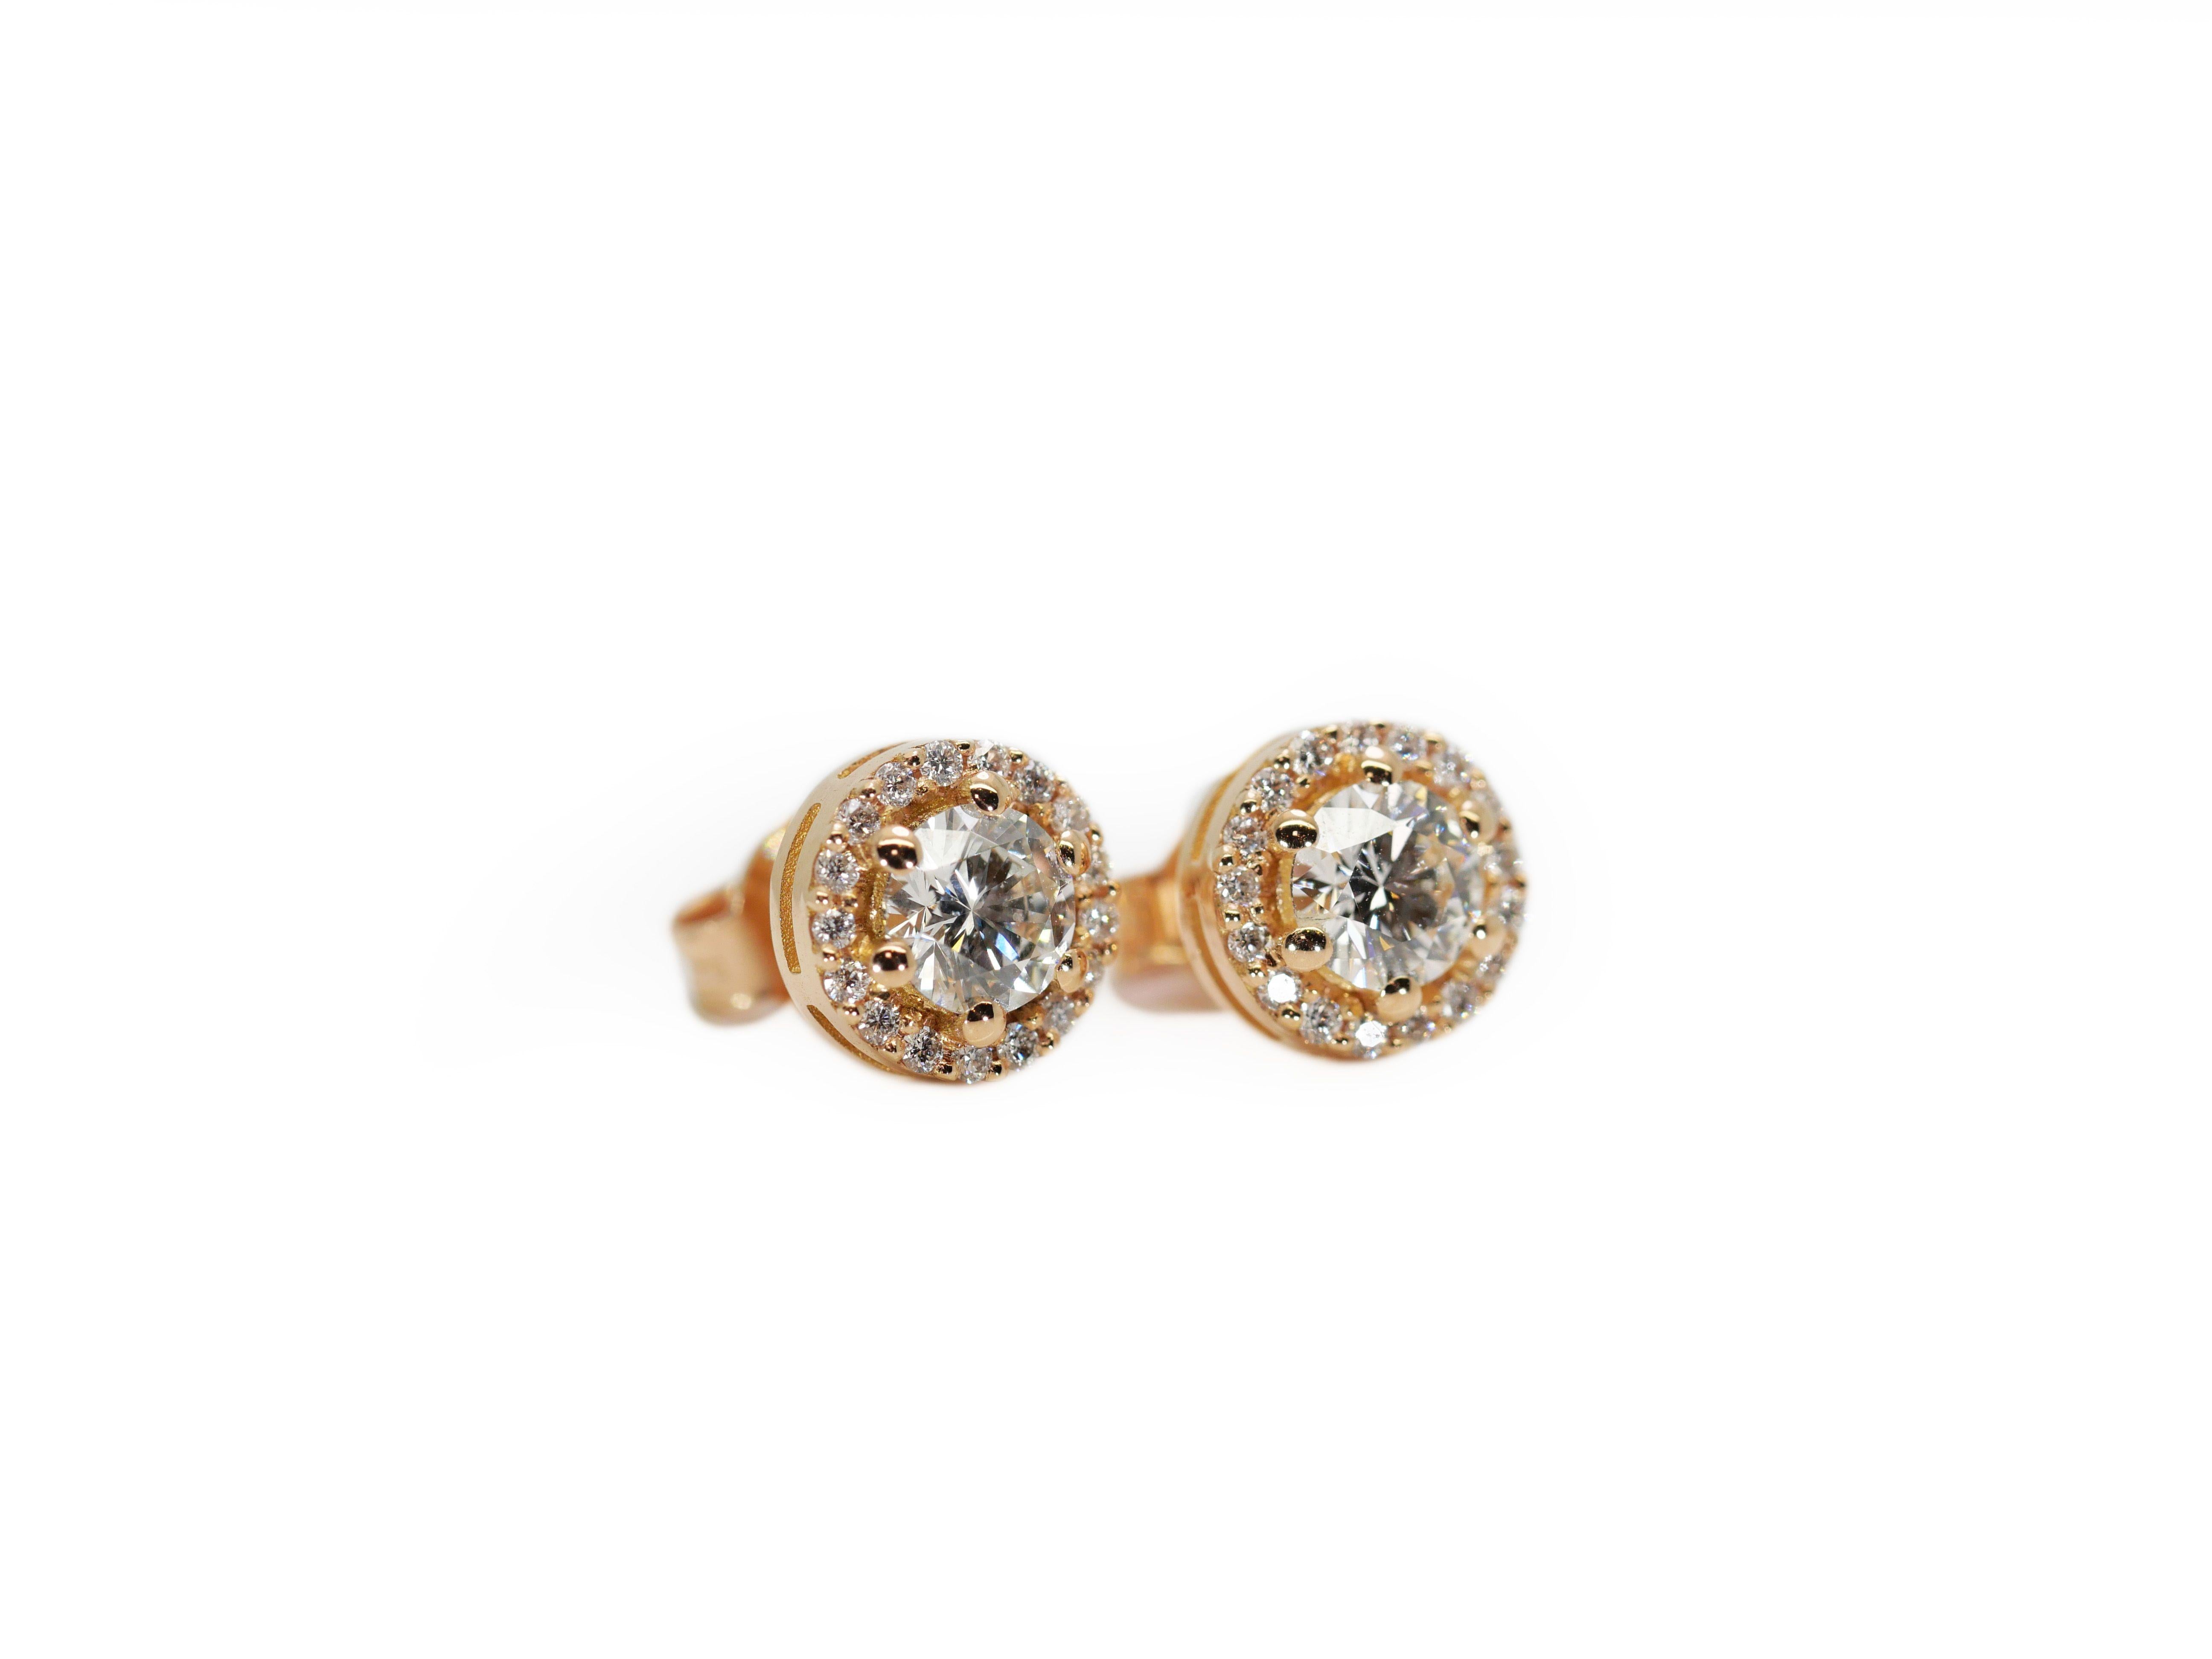 Beautiful Pair of Halo Diamond Earrings made from 18K Rose gold with 0.97 total carat of round brilliant diamonds.

-2 diamond main stone of 0.40 ct. each, total: 0.80 ct. 
cut: round brilliant
color: F
clarity: SI1

-34 diamond side stones of